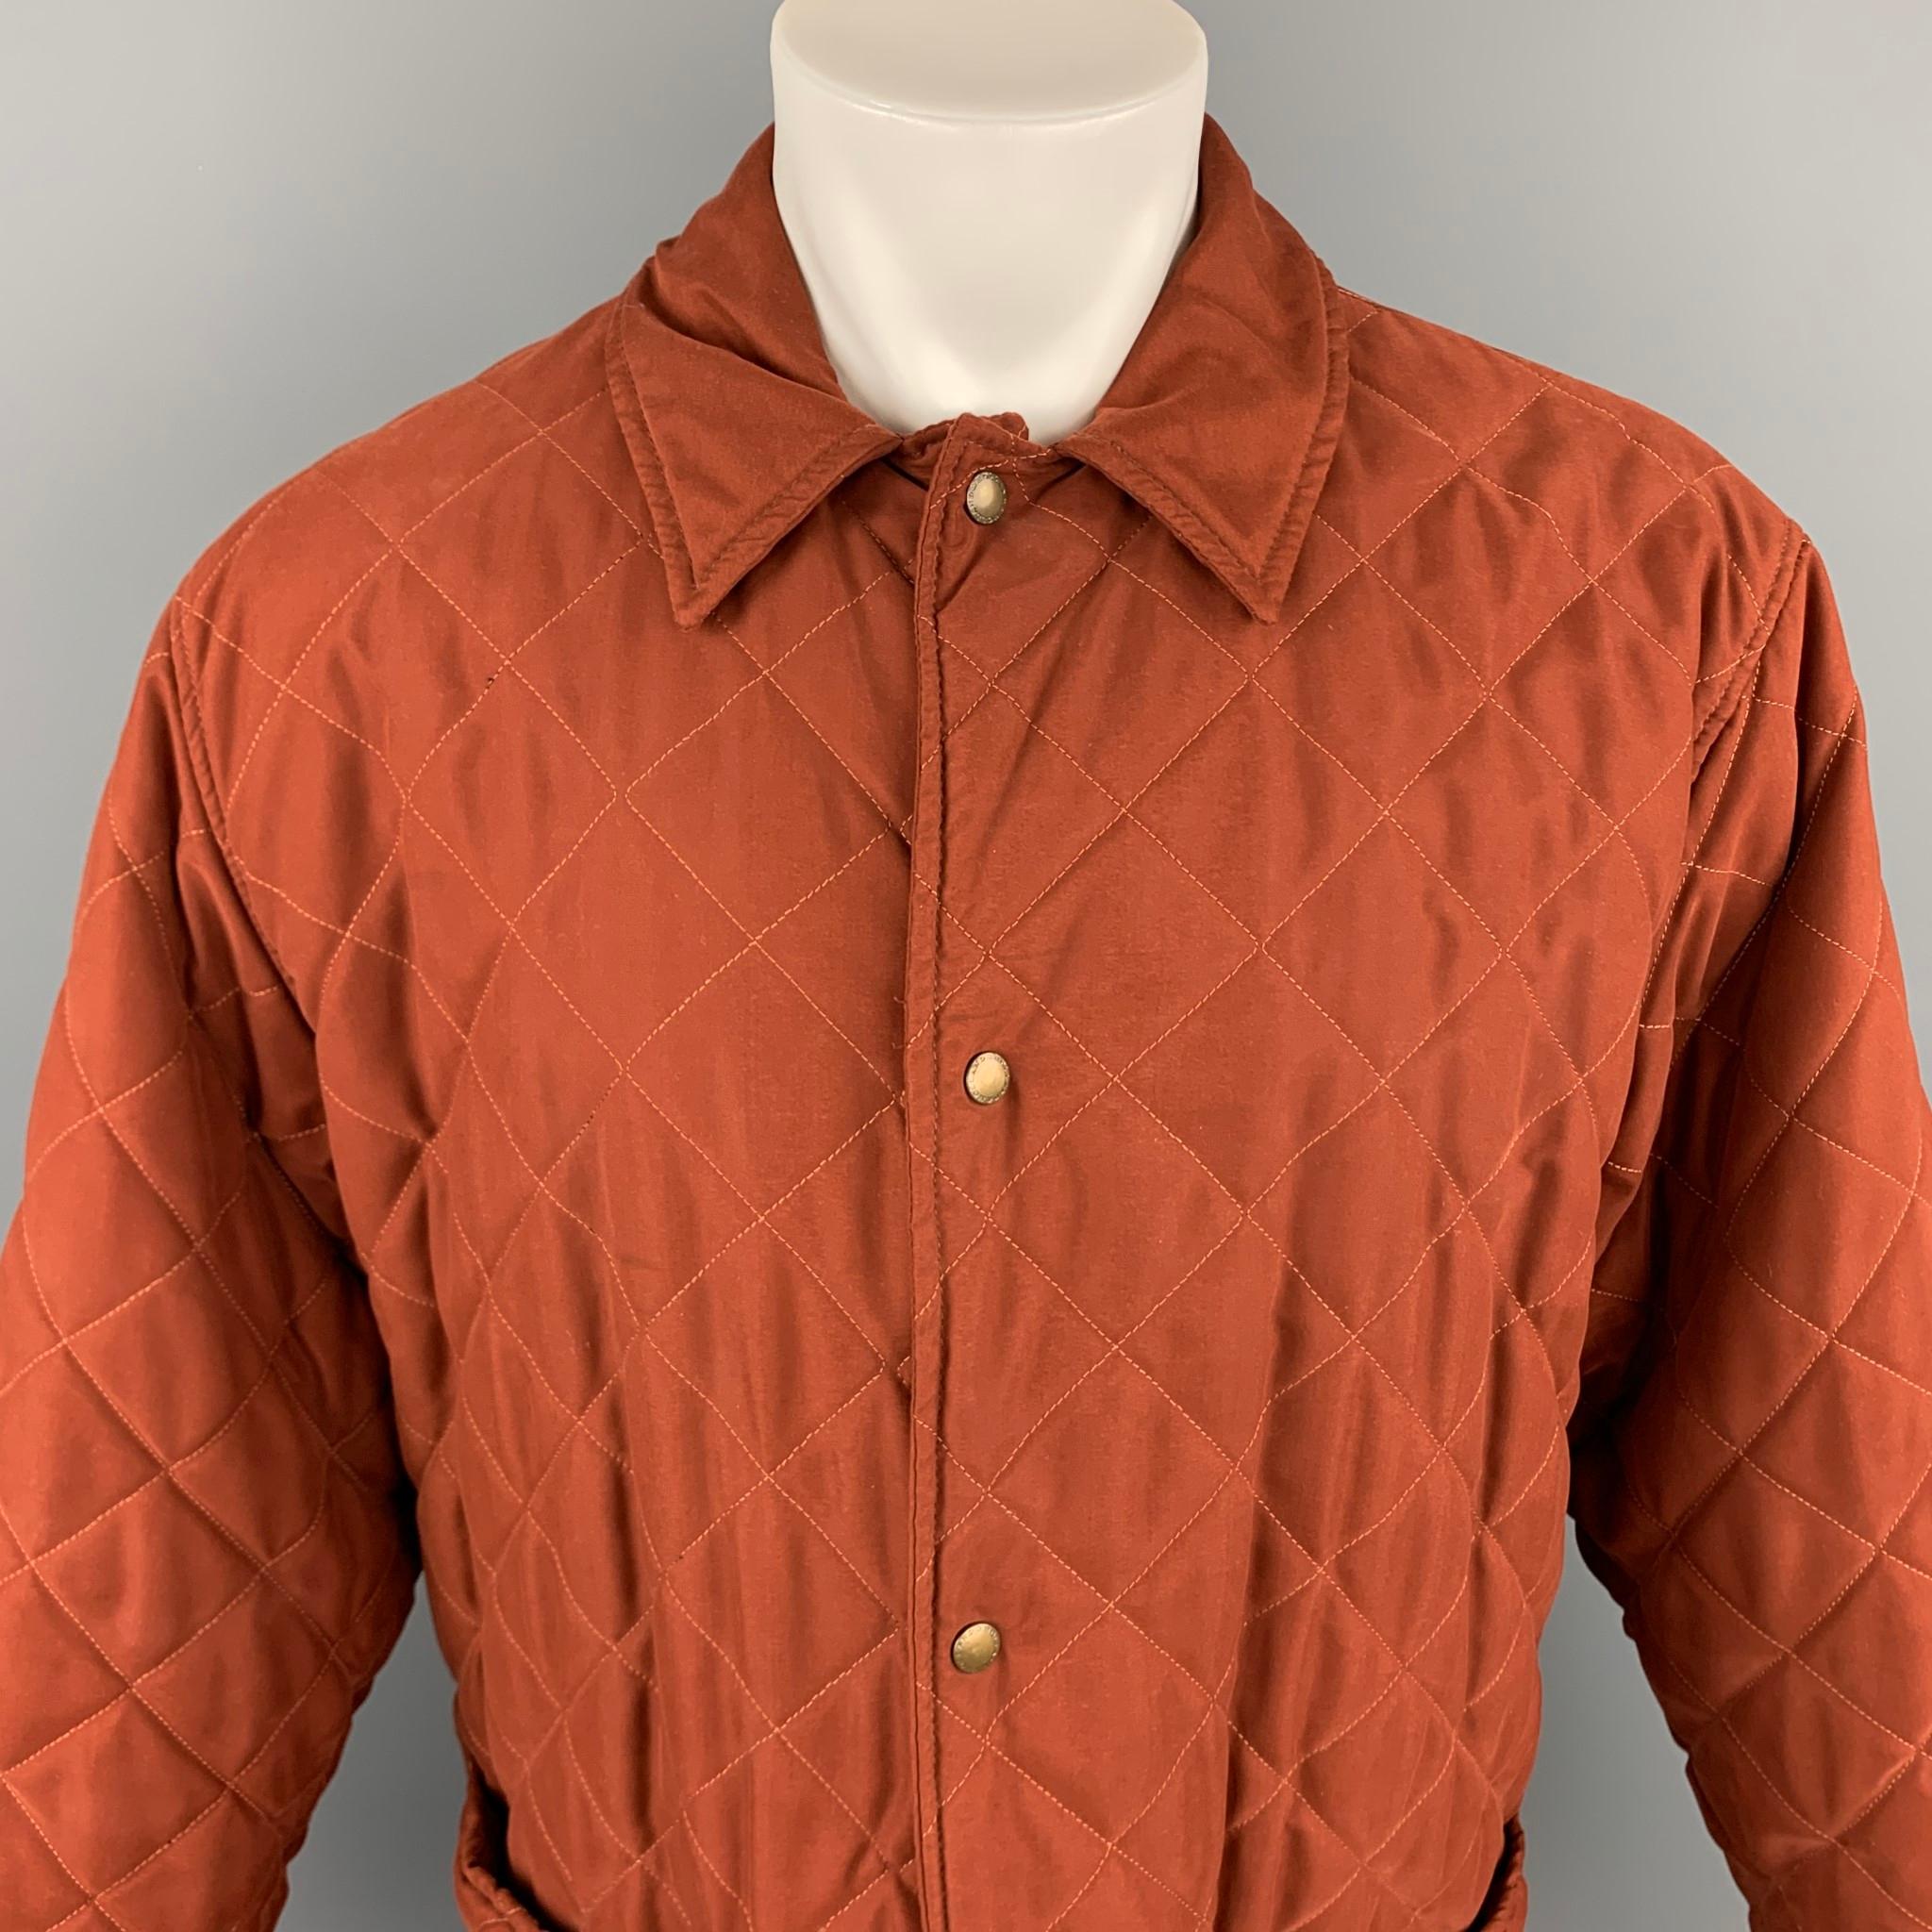 HOLLAND & HOLLAND coat comes in a rust quilted polyester with a full liner featuring a oversized fit, spread collar, patch pockets, and a snap button closure. Made in Great Britain. 

Very Good Pre-Owned Condition.
Marked: